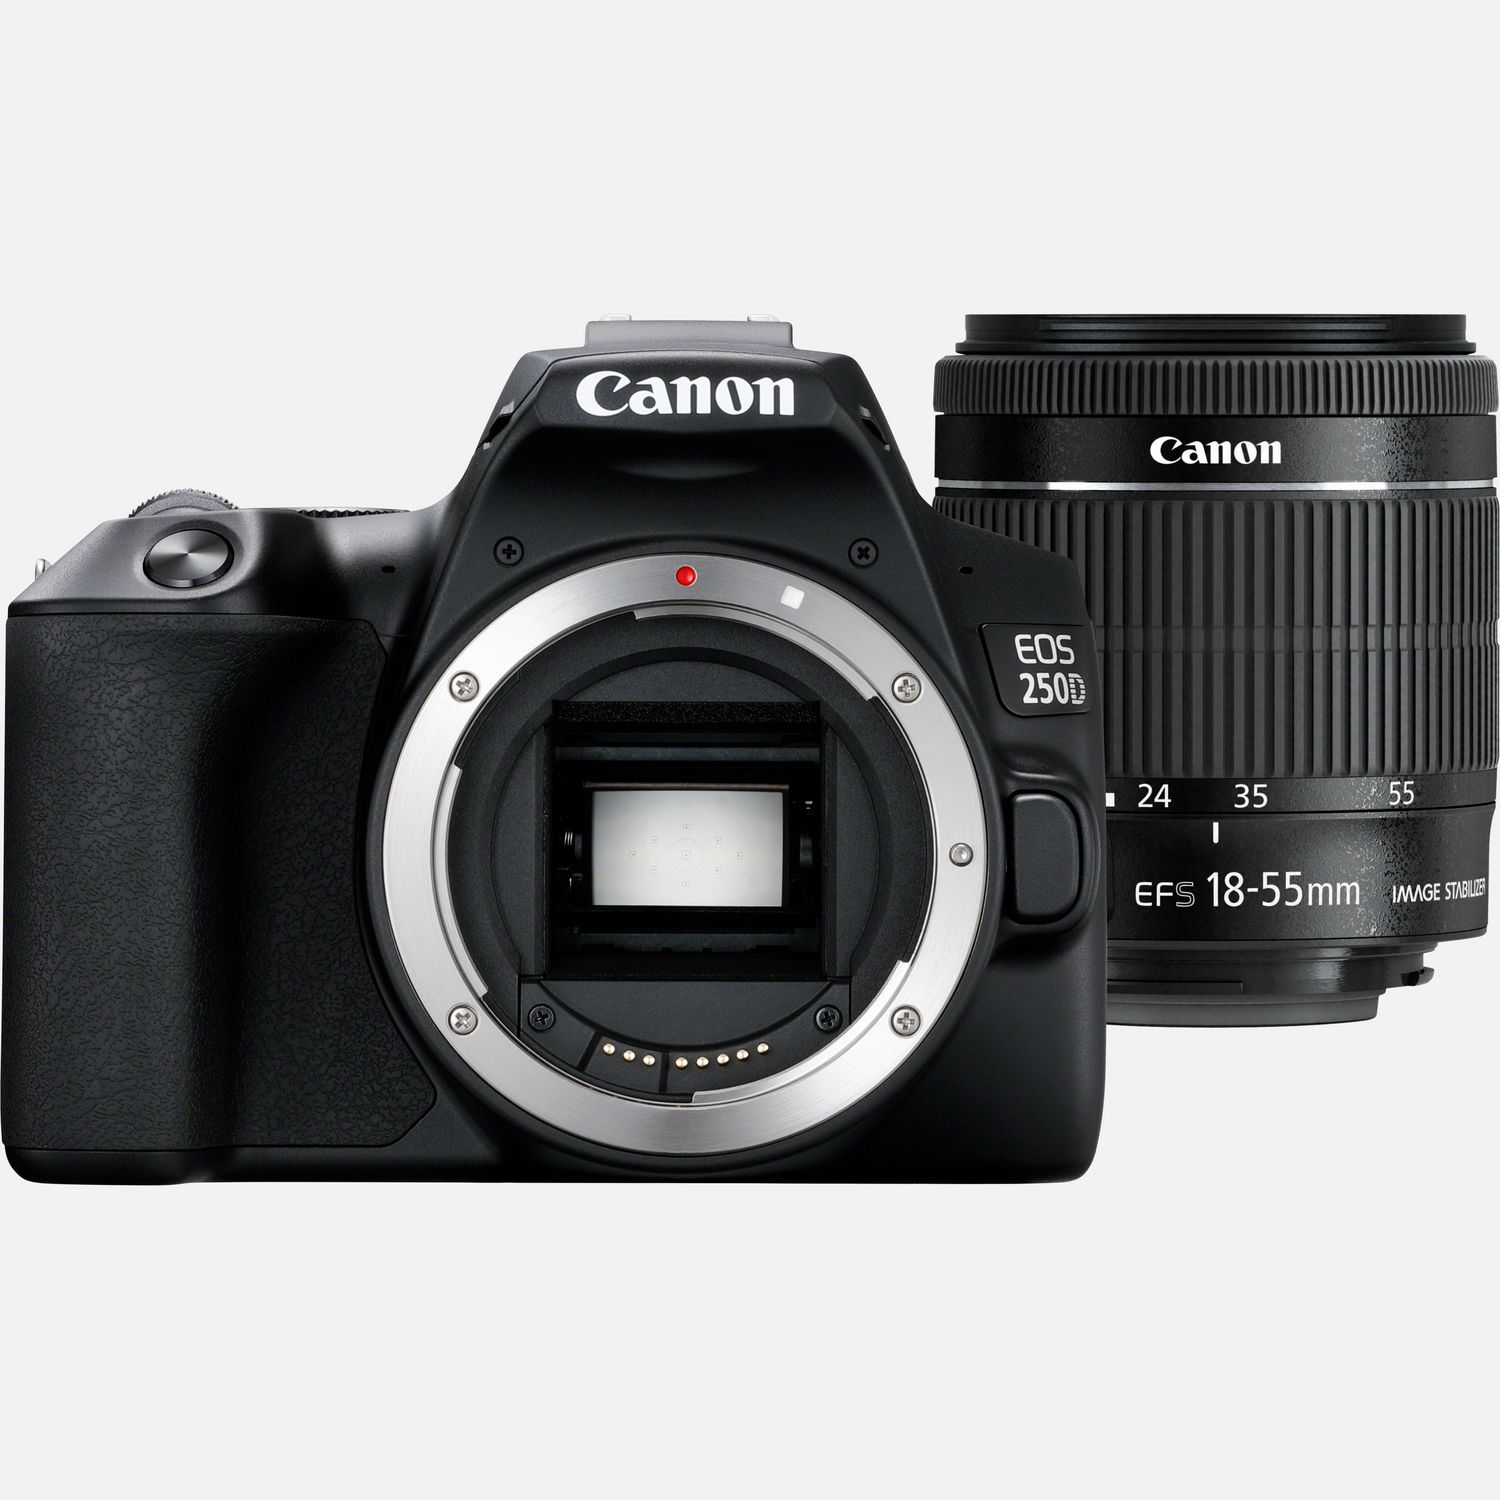 Buy Canon EOS STM Cameras 18-55mm — Body, EF-S Canon Store + Lens 250D OY in Wi-Fi IS f/4-5.6 Black